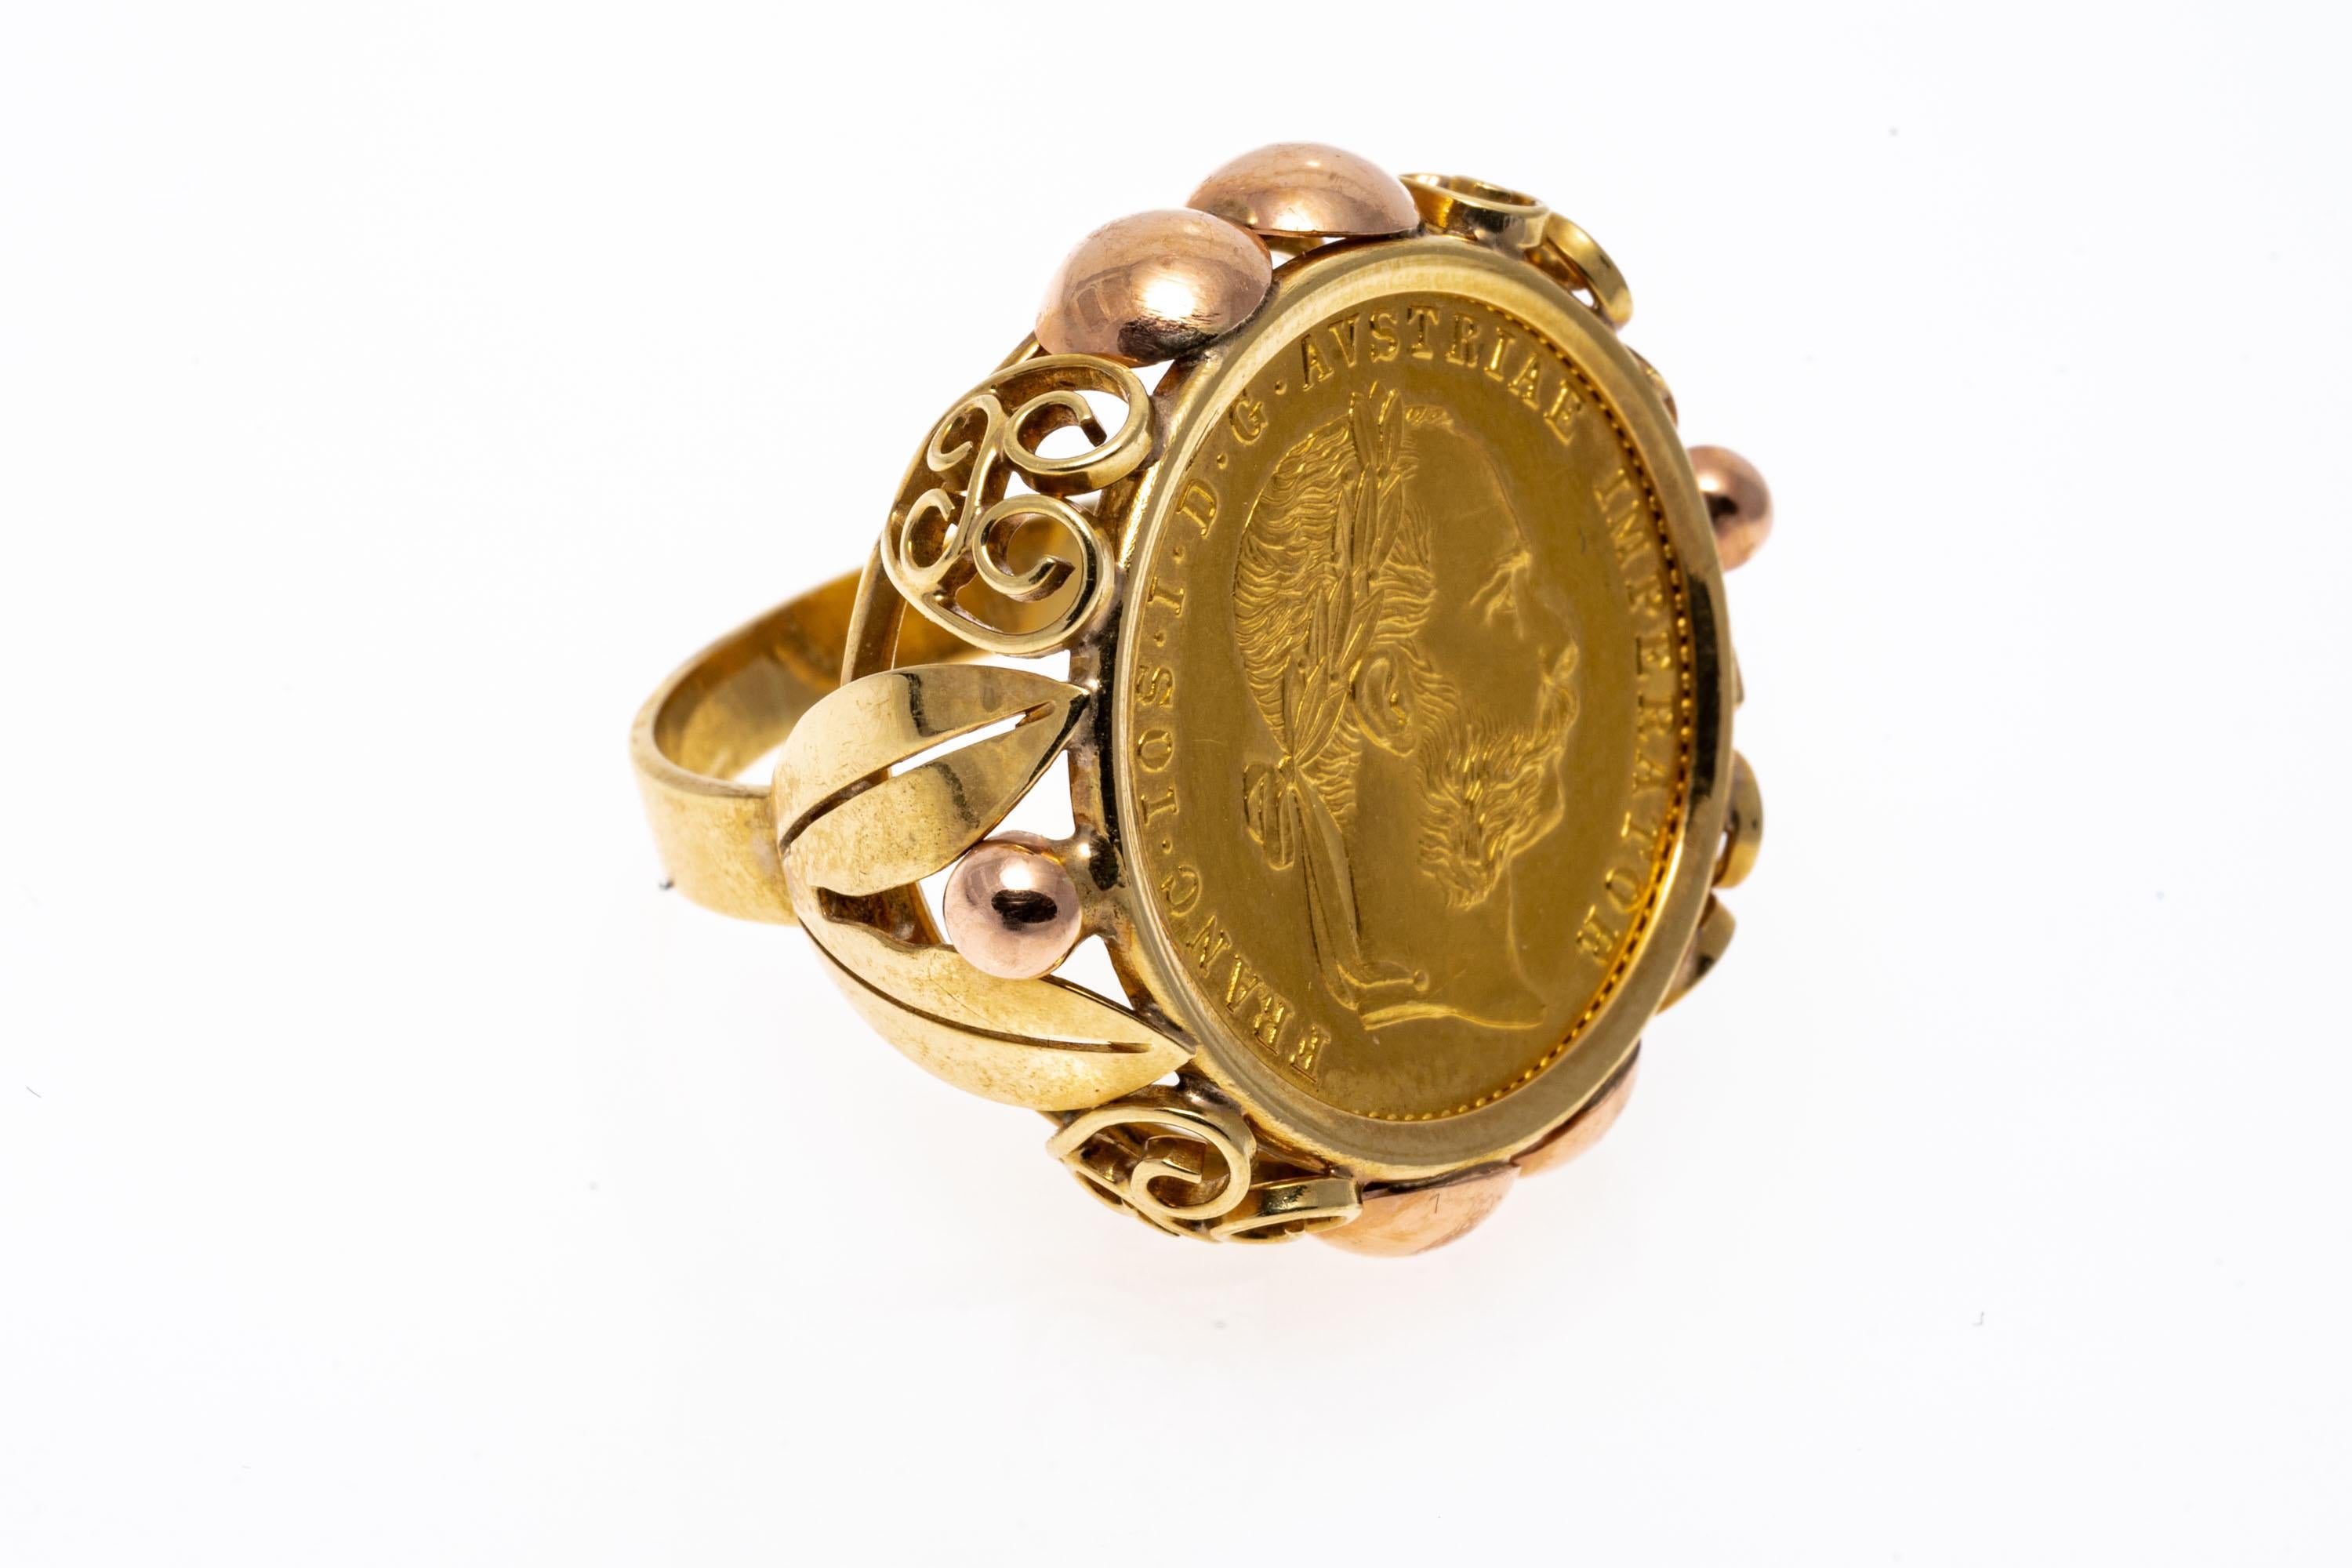 14k yellow gold ring. This elaborate and striking ring contains a center, is a 1915, Austria 4 Ducat coin, set into a yellow gold bezel and decorated with round, rose gold beads and yellow gold scroll patterns on both the frame and the gallery. The